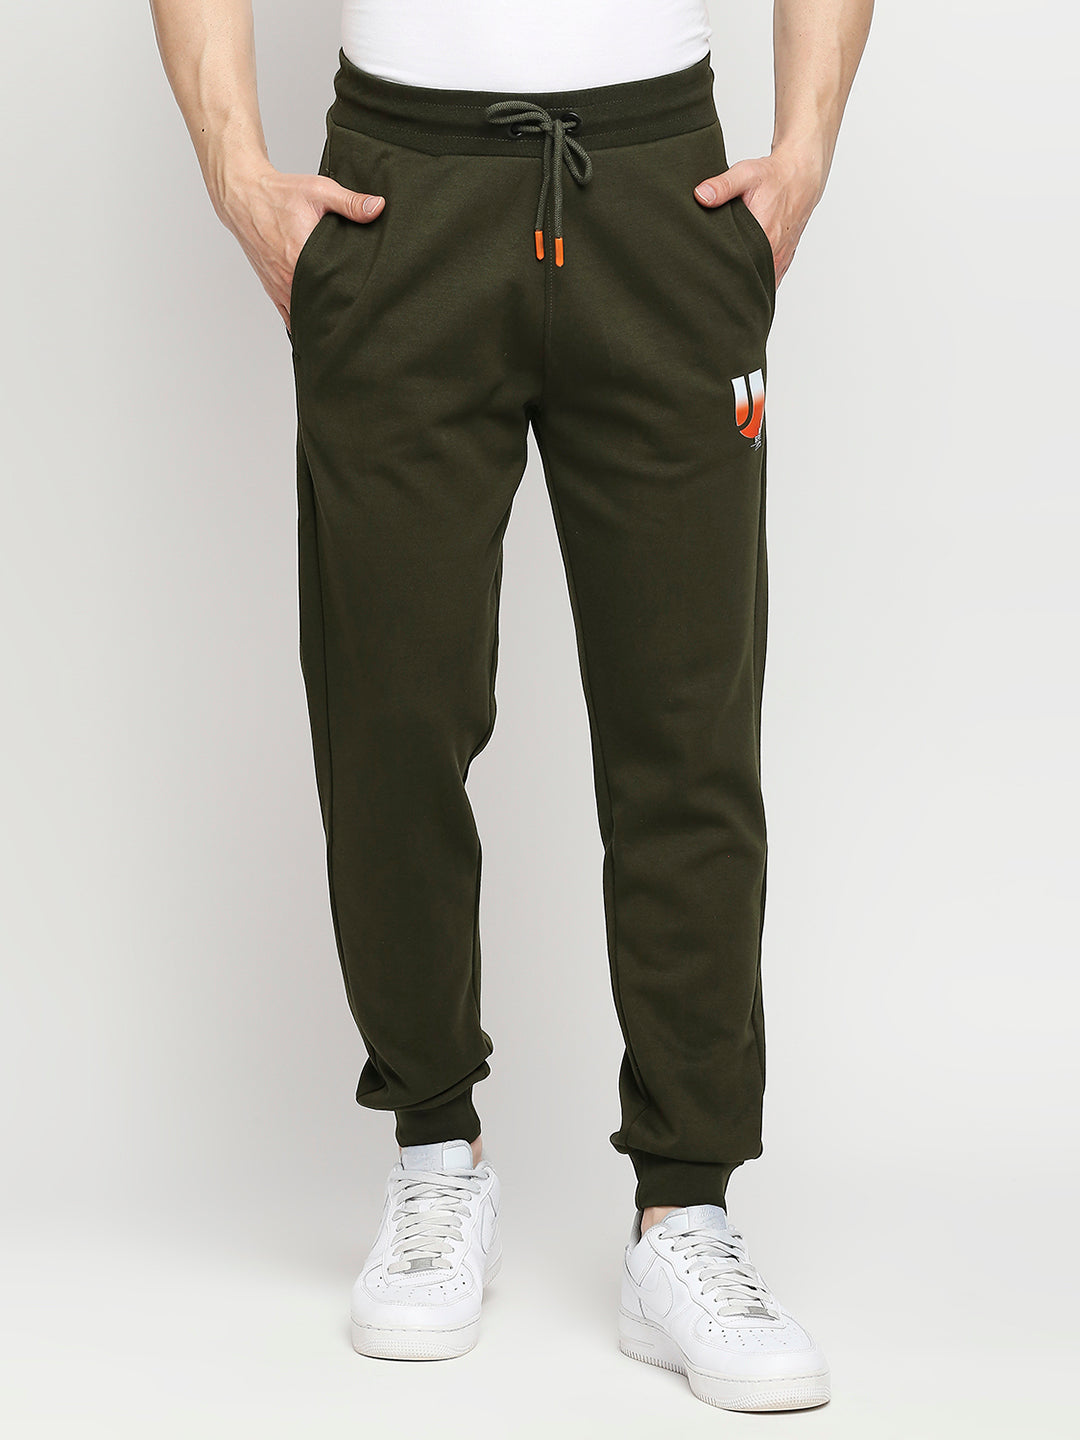 Men Premium Cotton Blend Knitted Rifle Green Trackpant- UnderJeans by Spykar